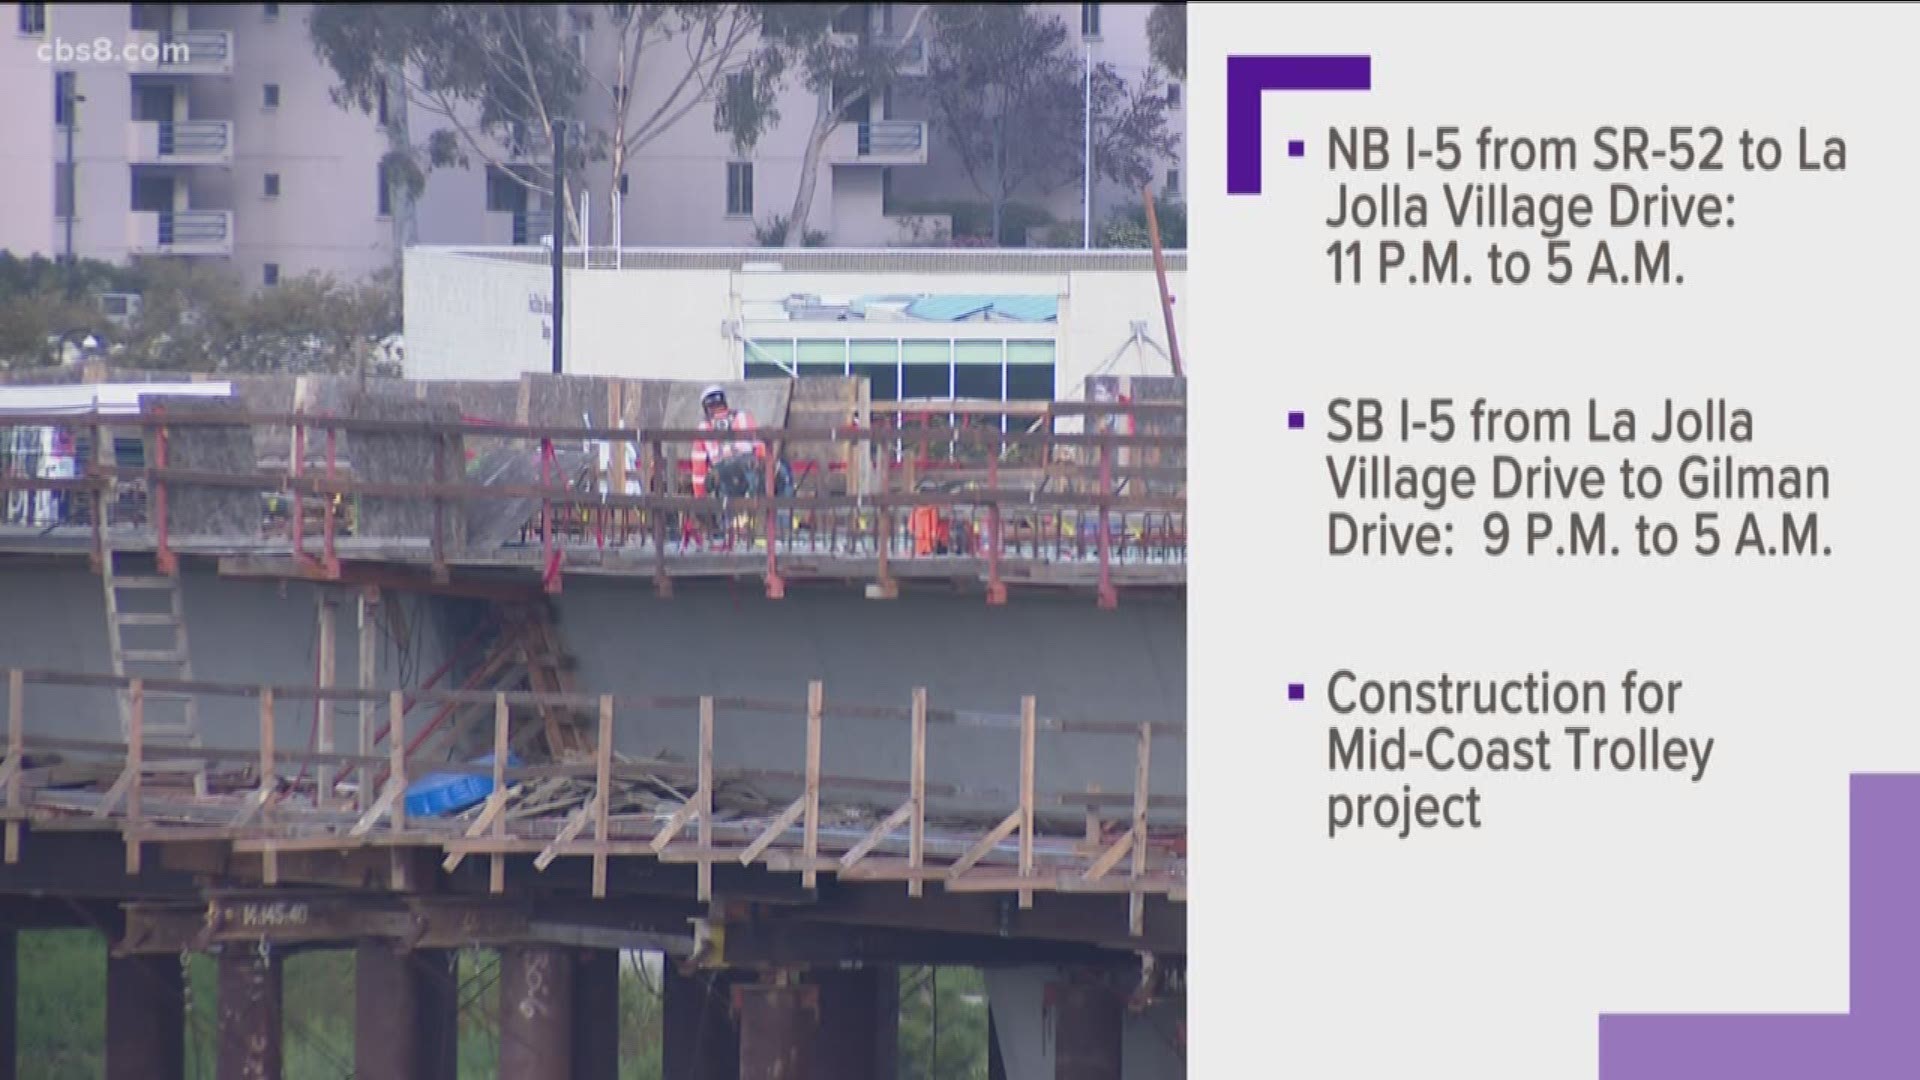 SANDAG will close portions of Interstate 5 in La Jolla today to conduct the largest concrete pour of the Mid-Coast Trolley project since it began in 2016.